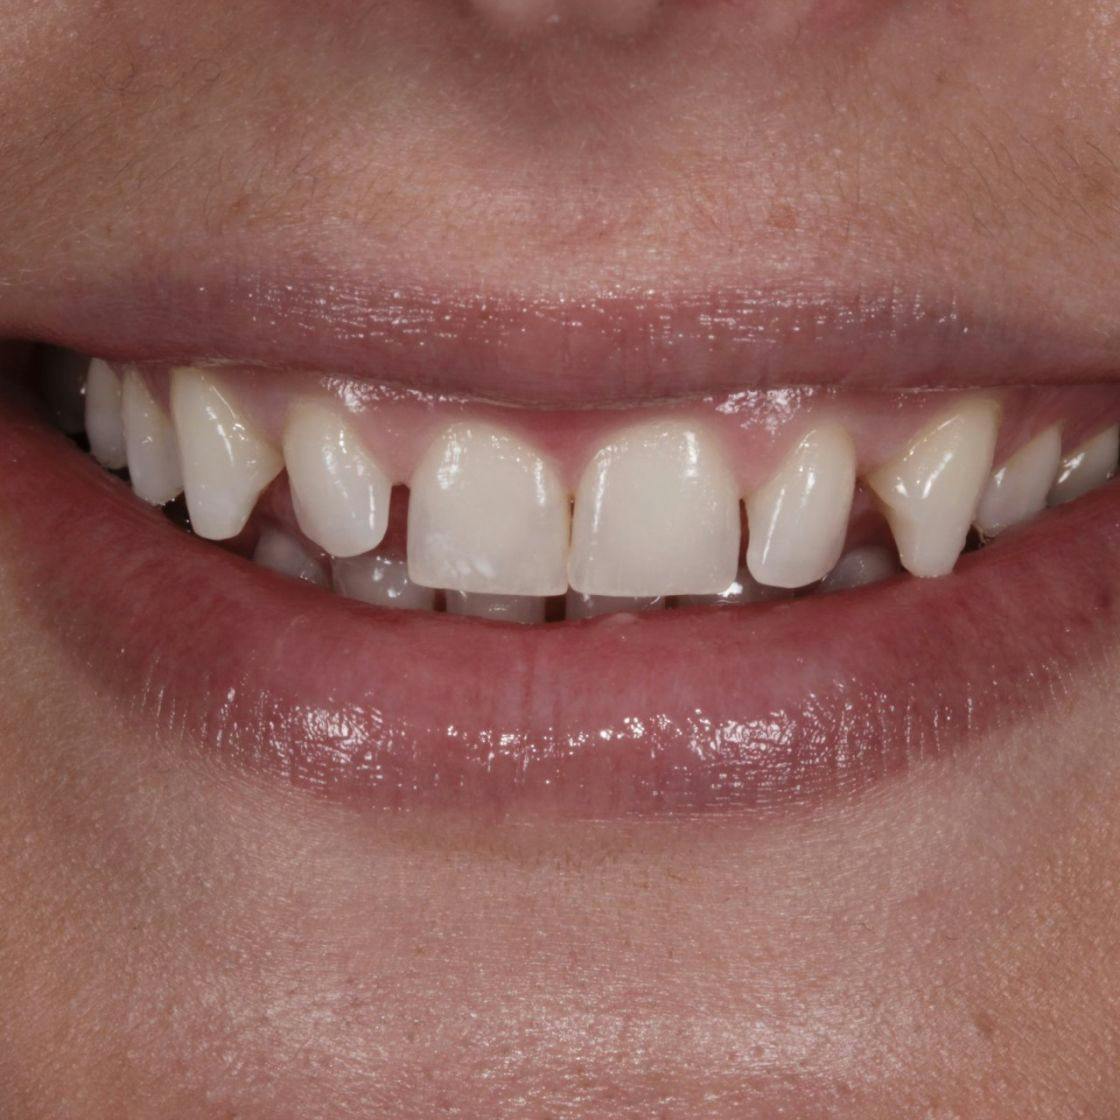 Woman's smile and teeth before composite bonding treatment